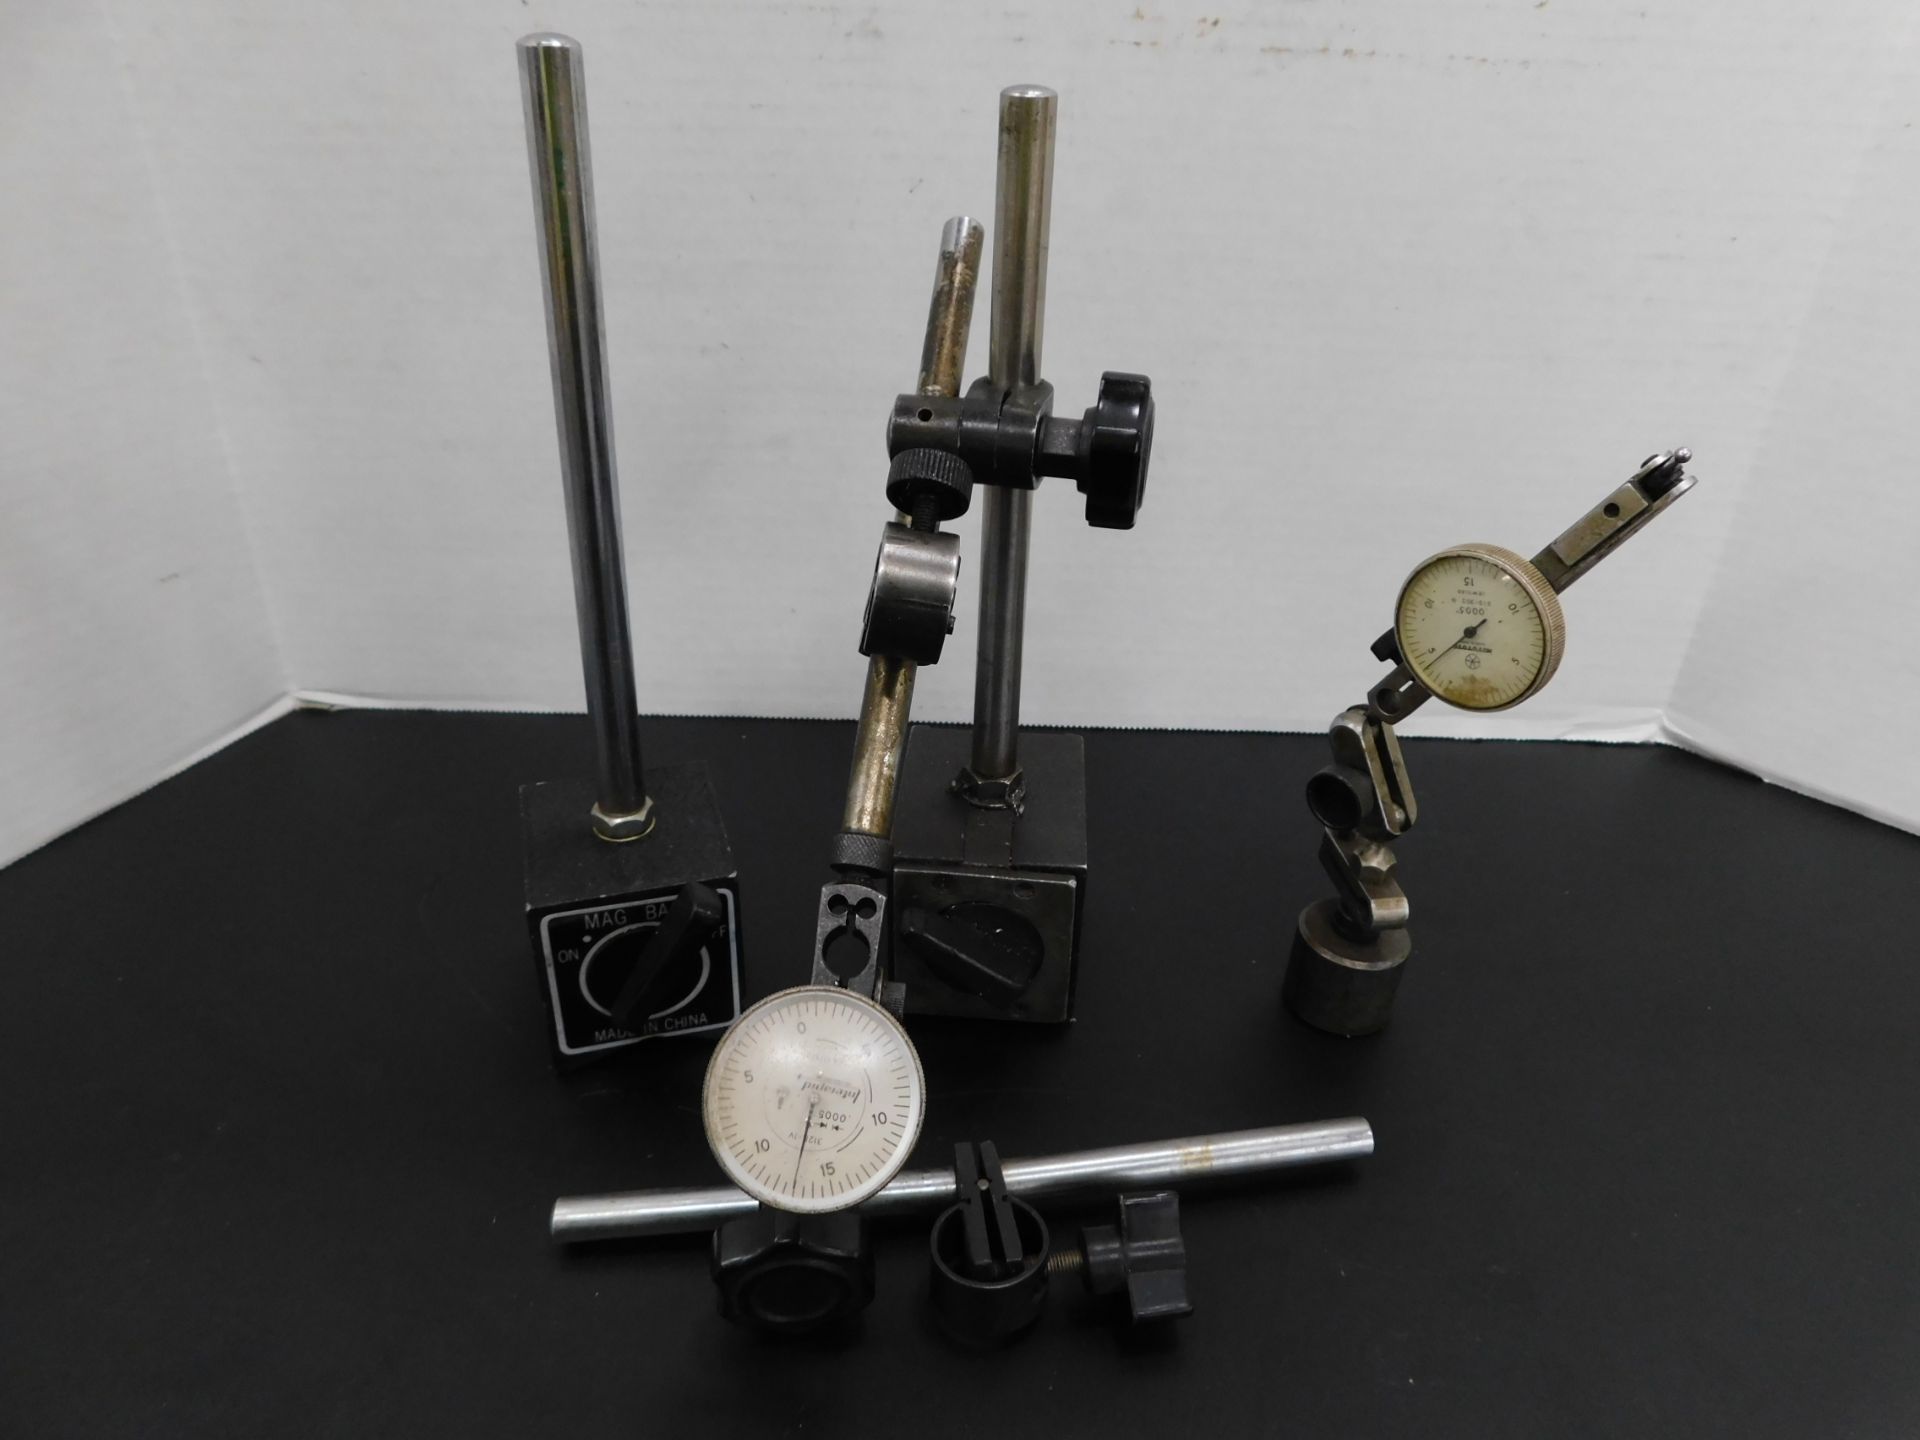 Magnetic Base Indicator Stands and Dial Indicators